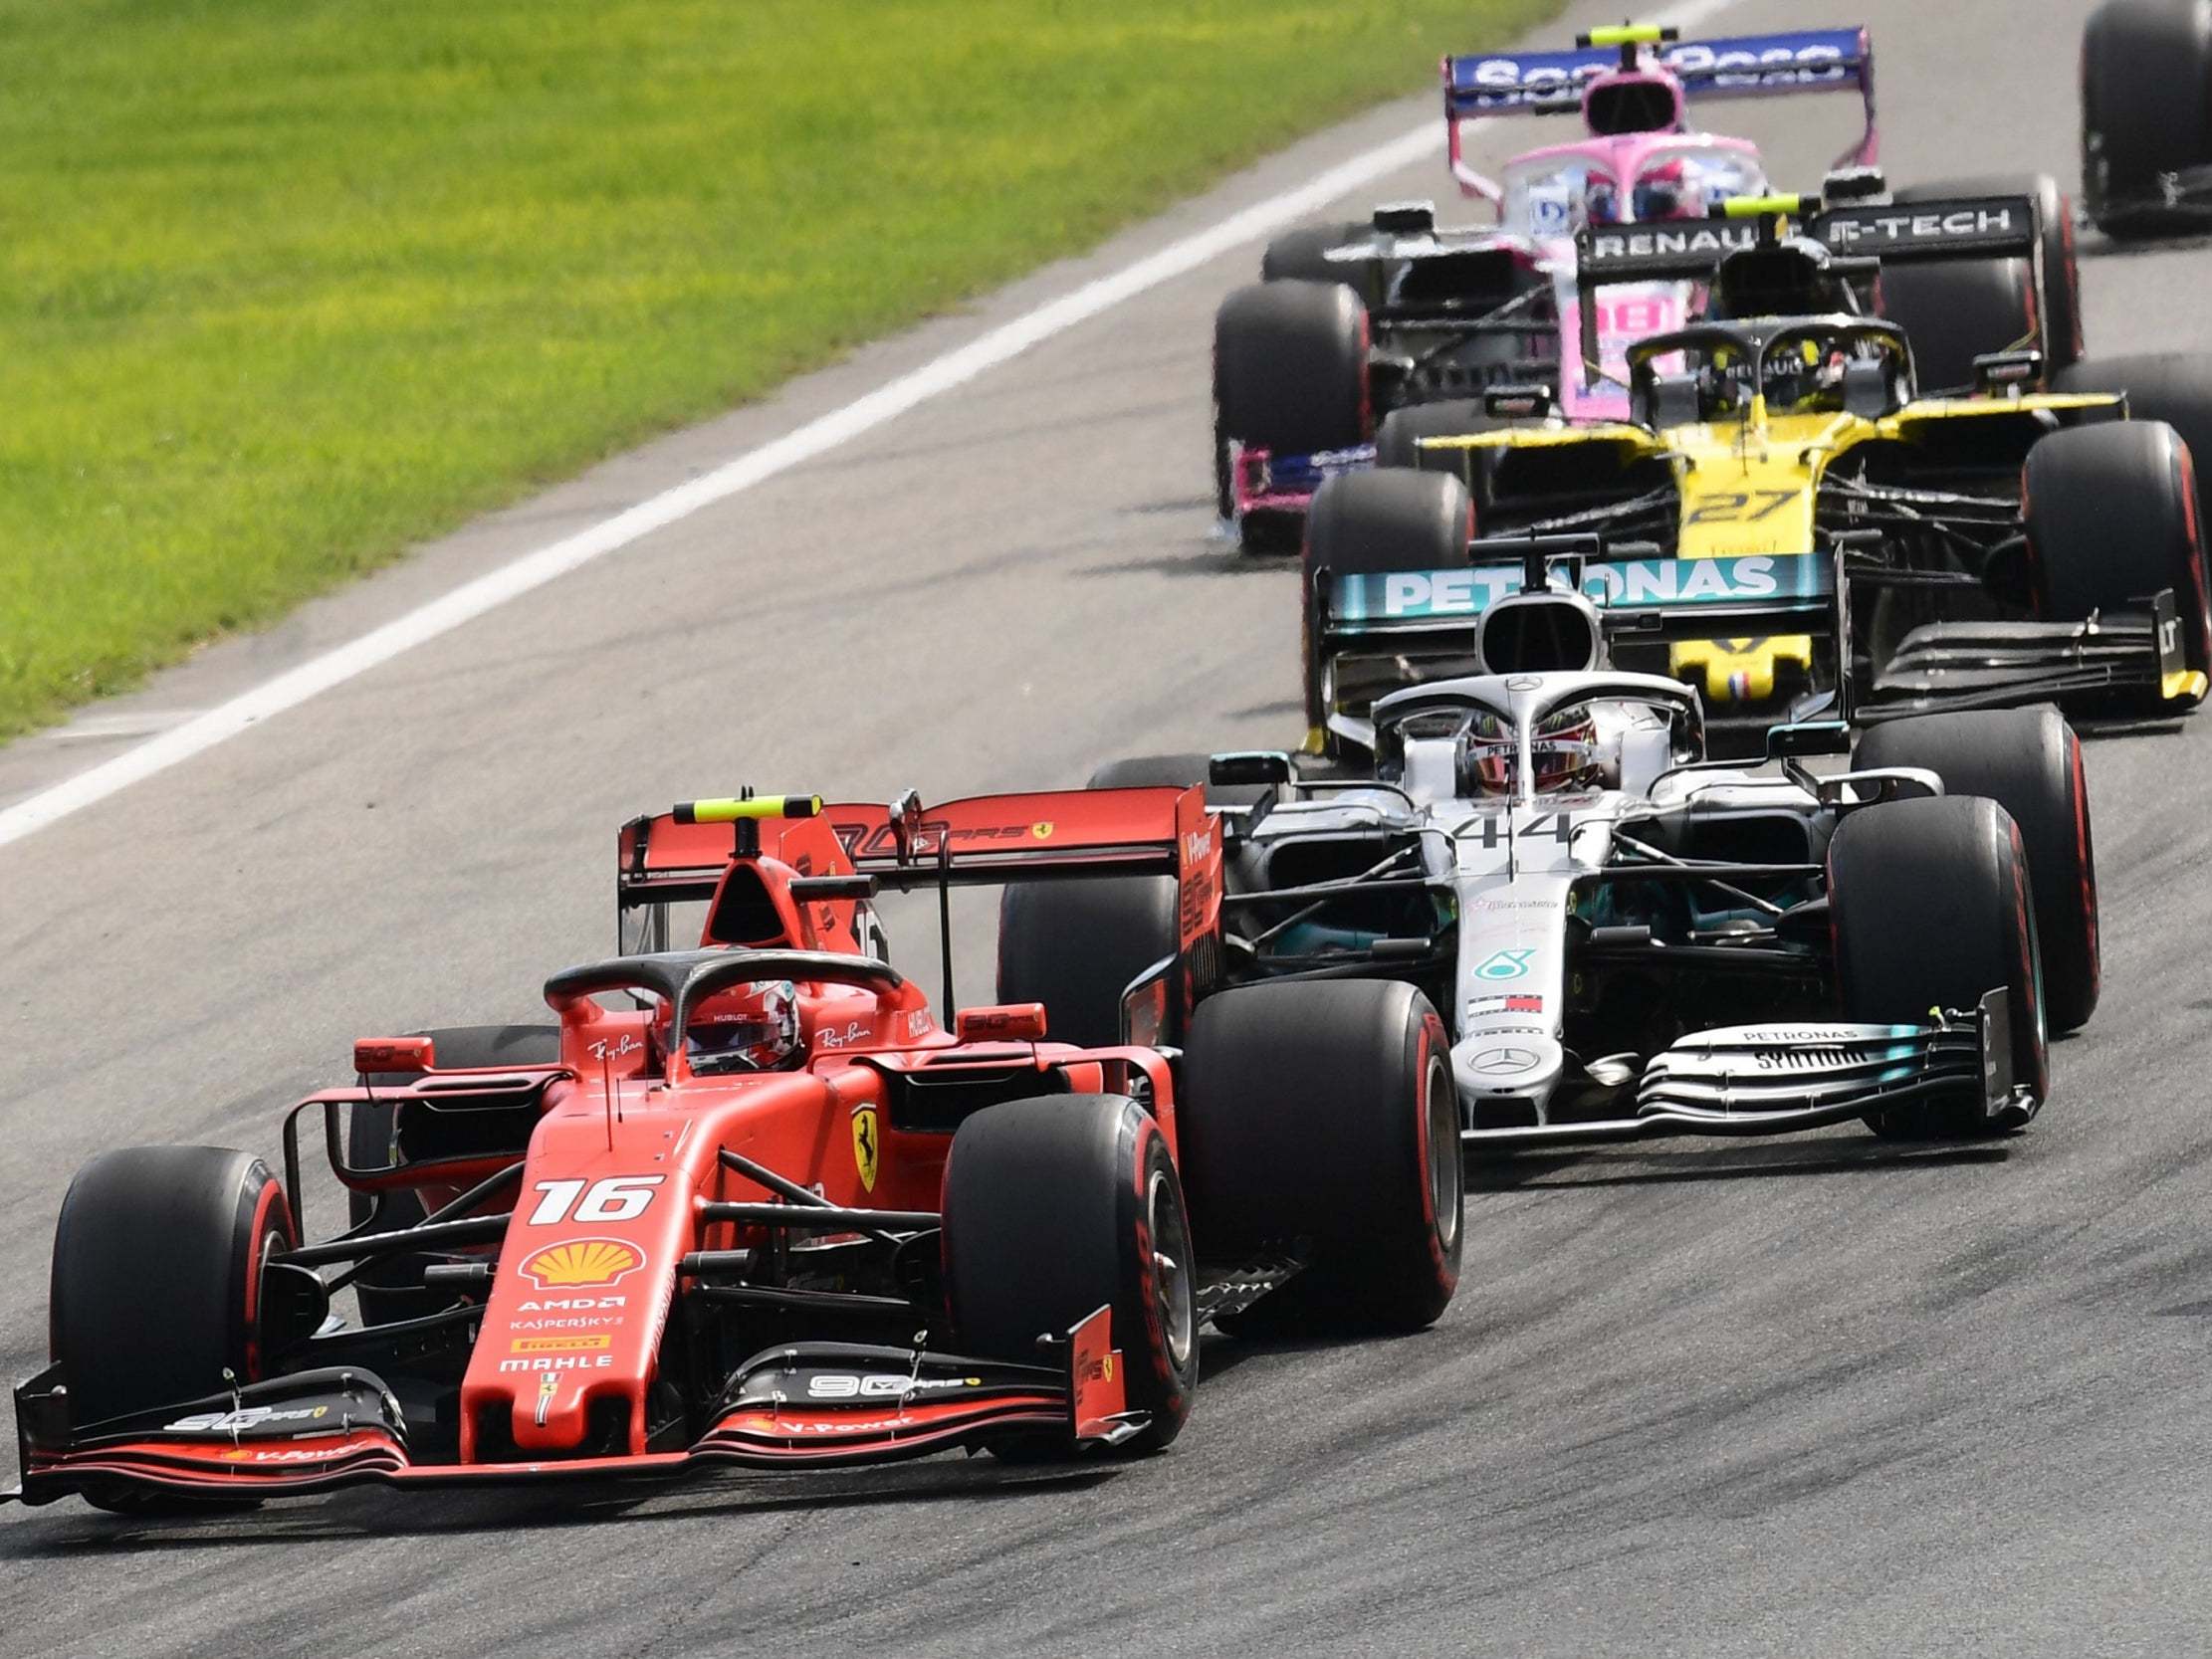 Italian Grand Prix result: Charles Leclerc holds off Lewis Hamilton to clinch victory at Monza